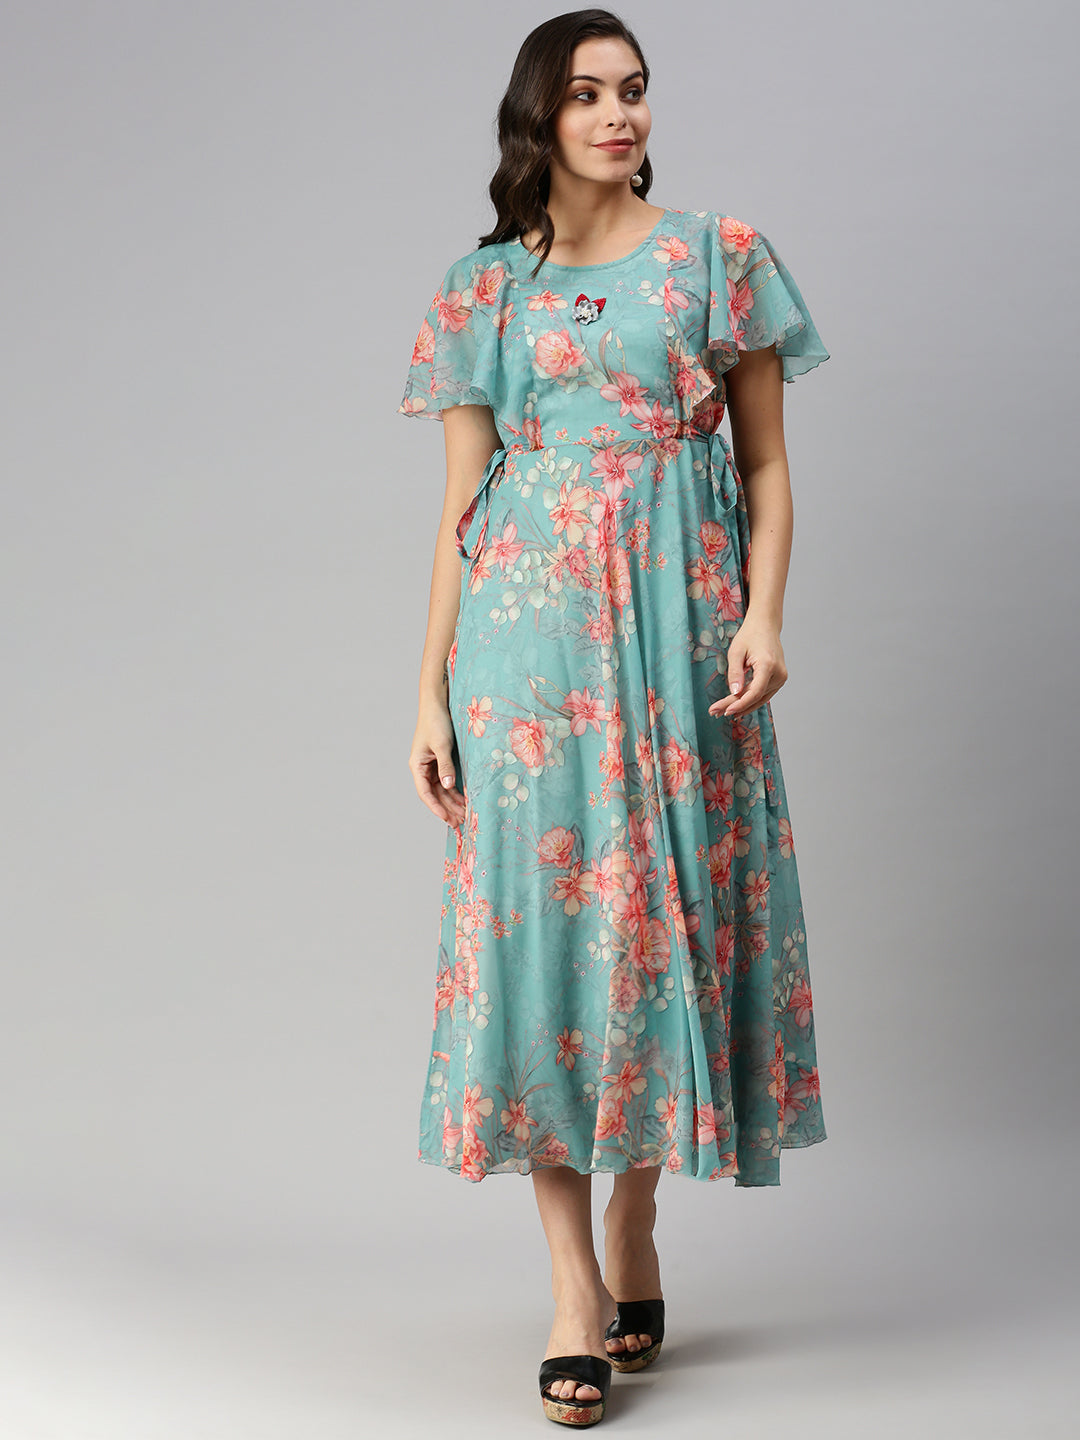 Women's Floral Sea Green Fit and Flare Dress